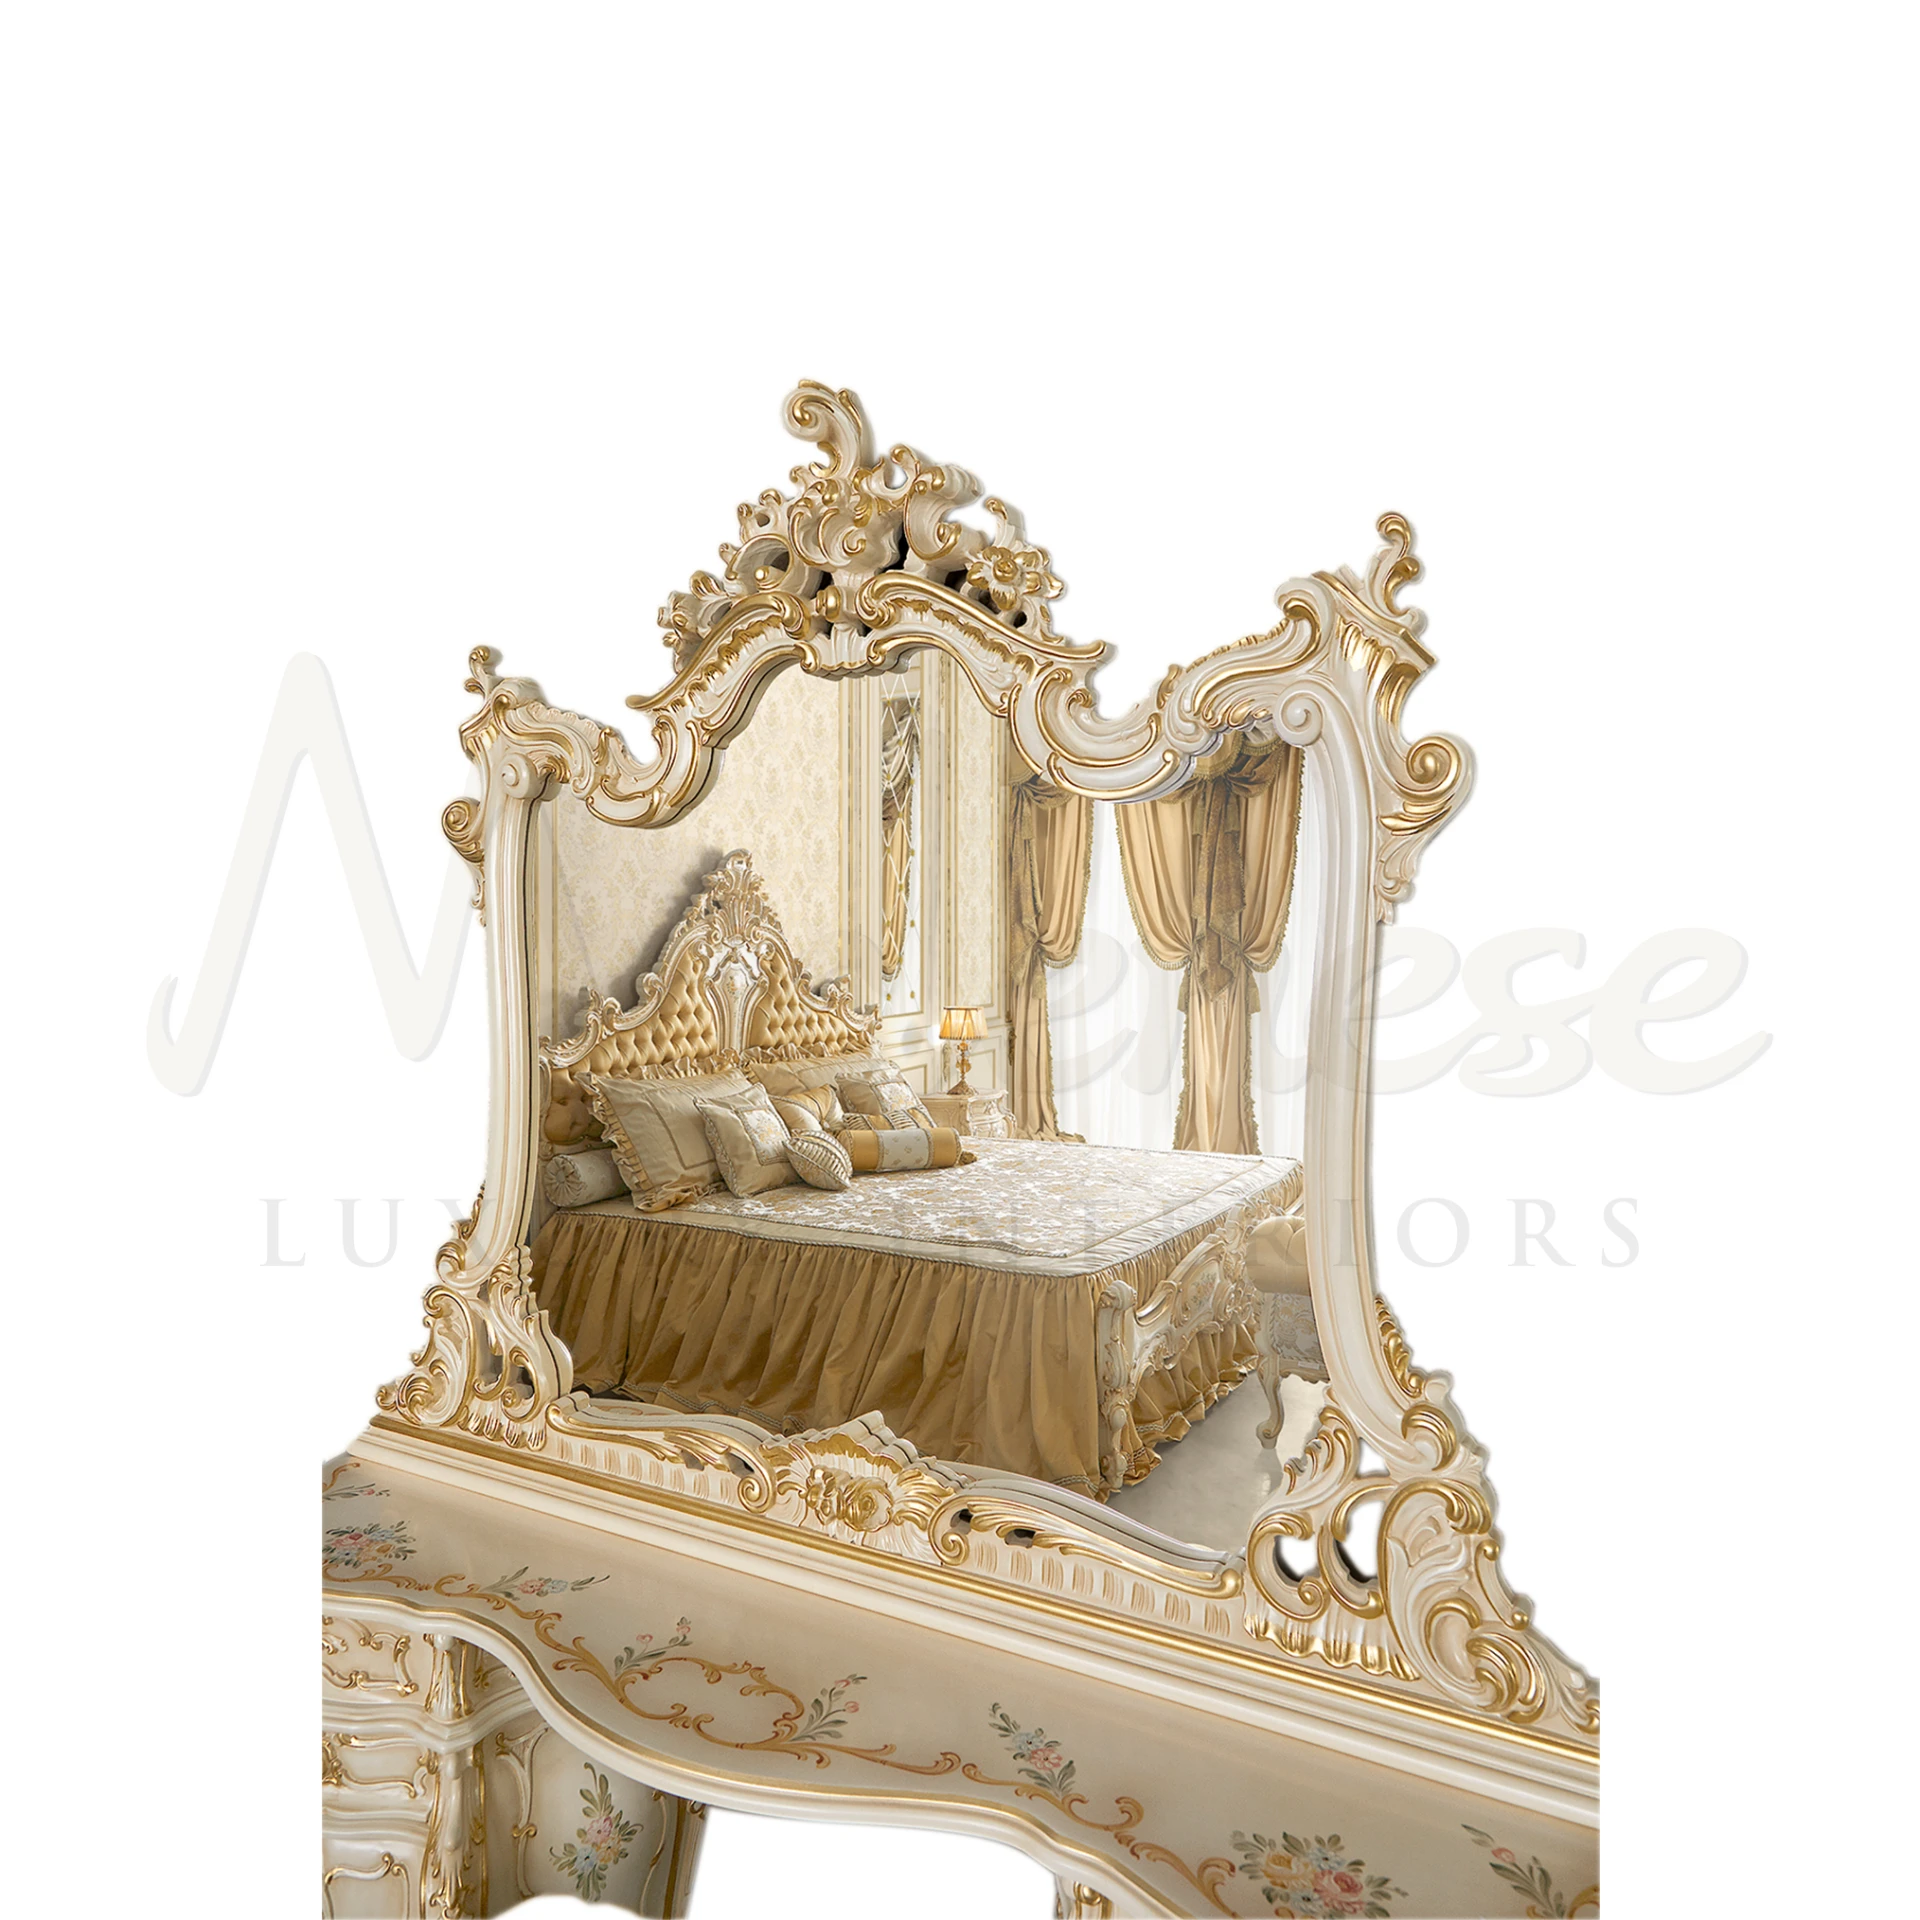 Classic Style Figured Mirror, showcasing intricate carvings and gold leaf embellishments for a luxurious interior design.